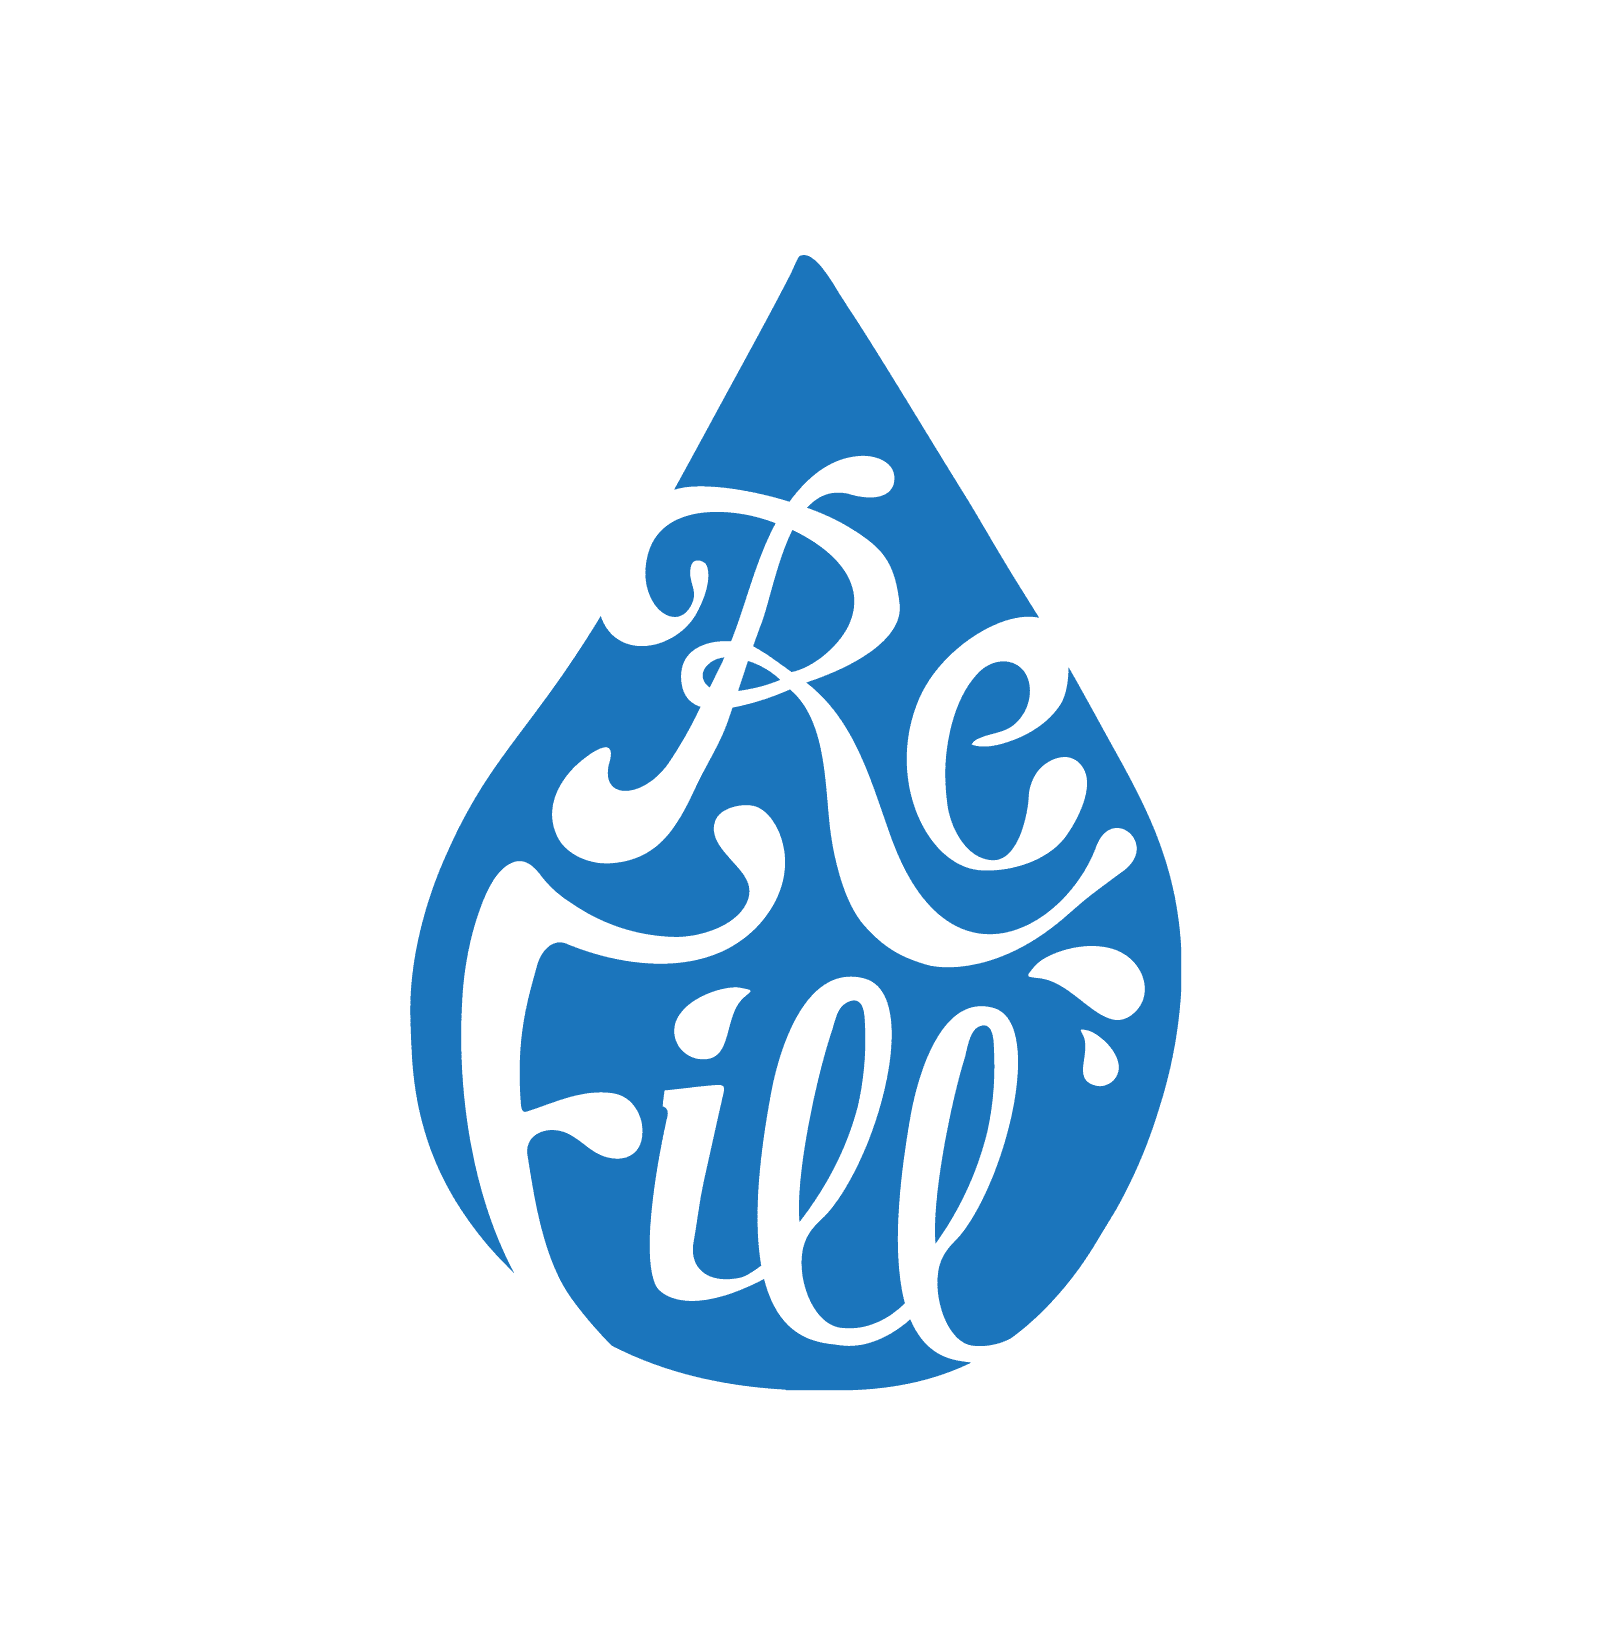 Would you like to be a Refill ambassador?